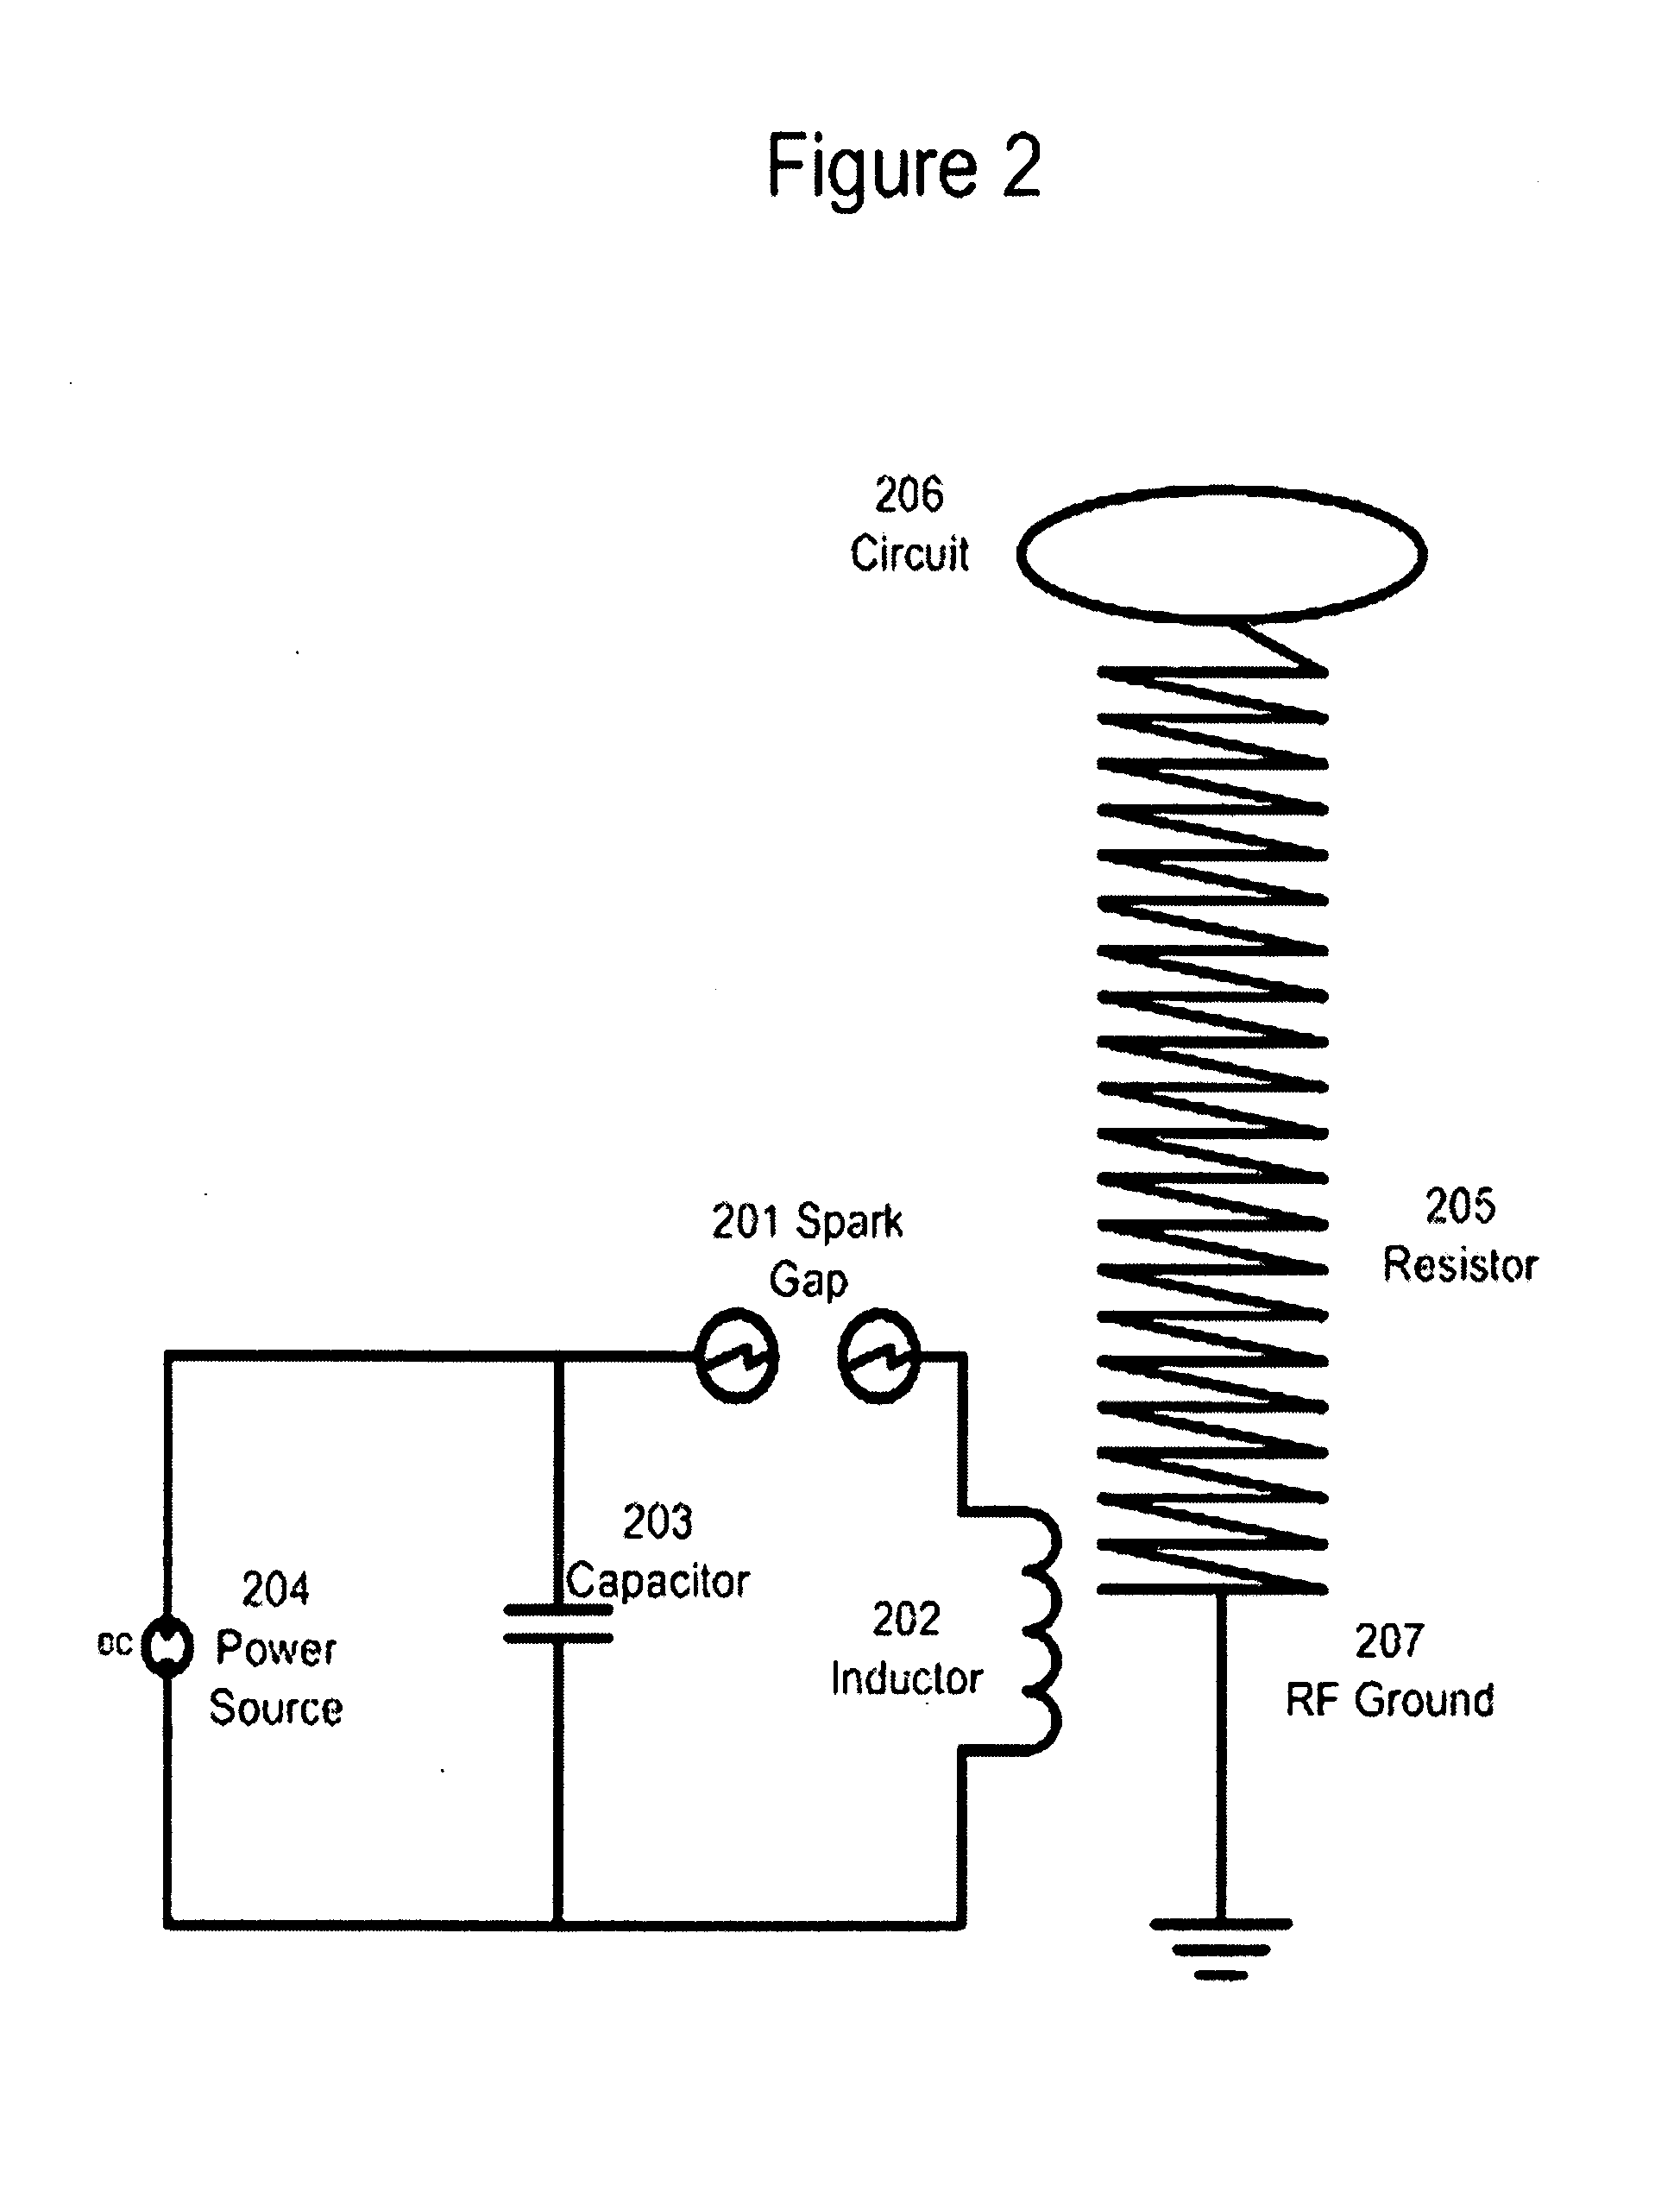 System and method for fusion power generation using very high electrical potential difference